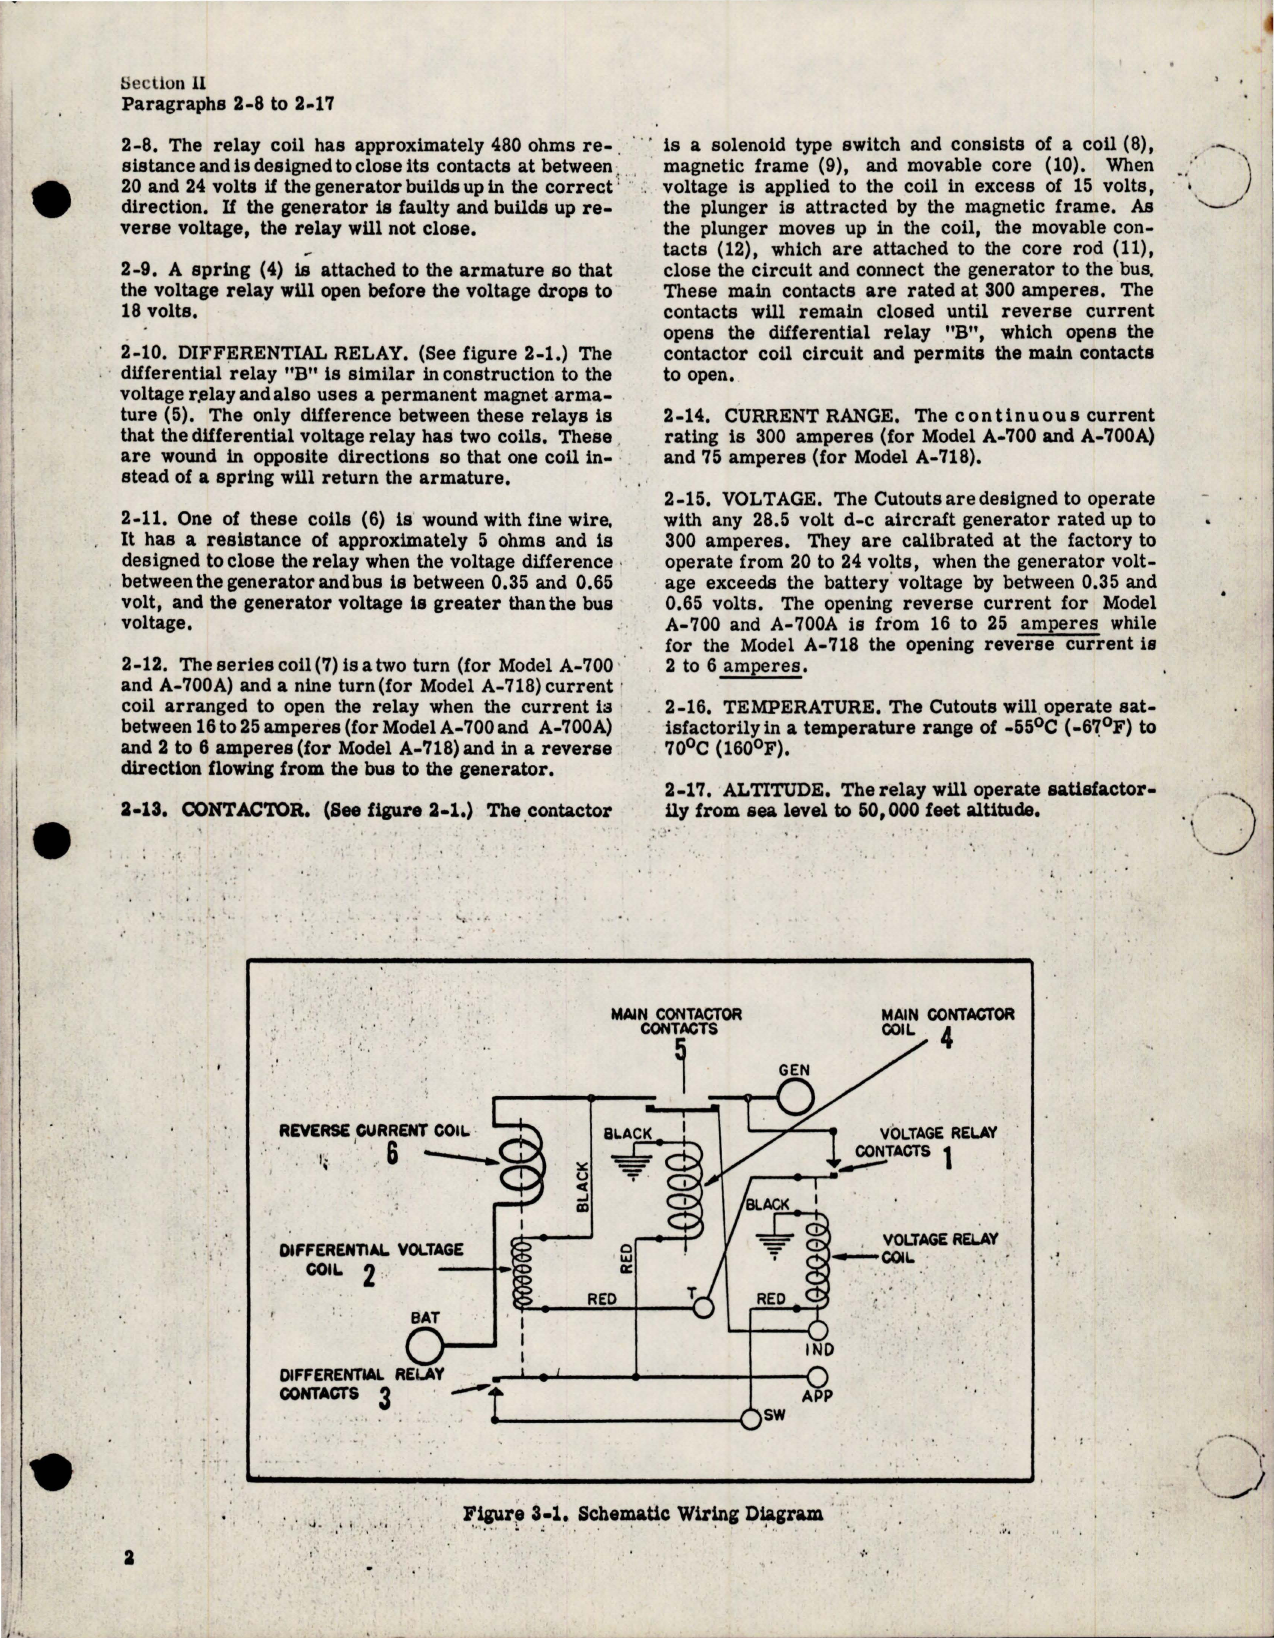 Sample page 5 from AirCorps Library document: Overhaul Instructions for Reverse Current Cutout - Parts A-700, A-700A and A-718 